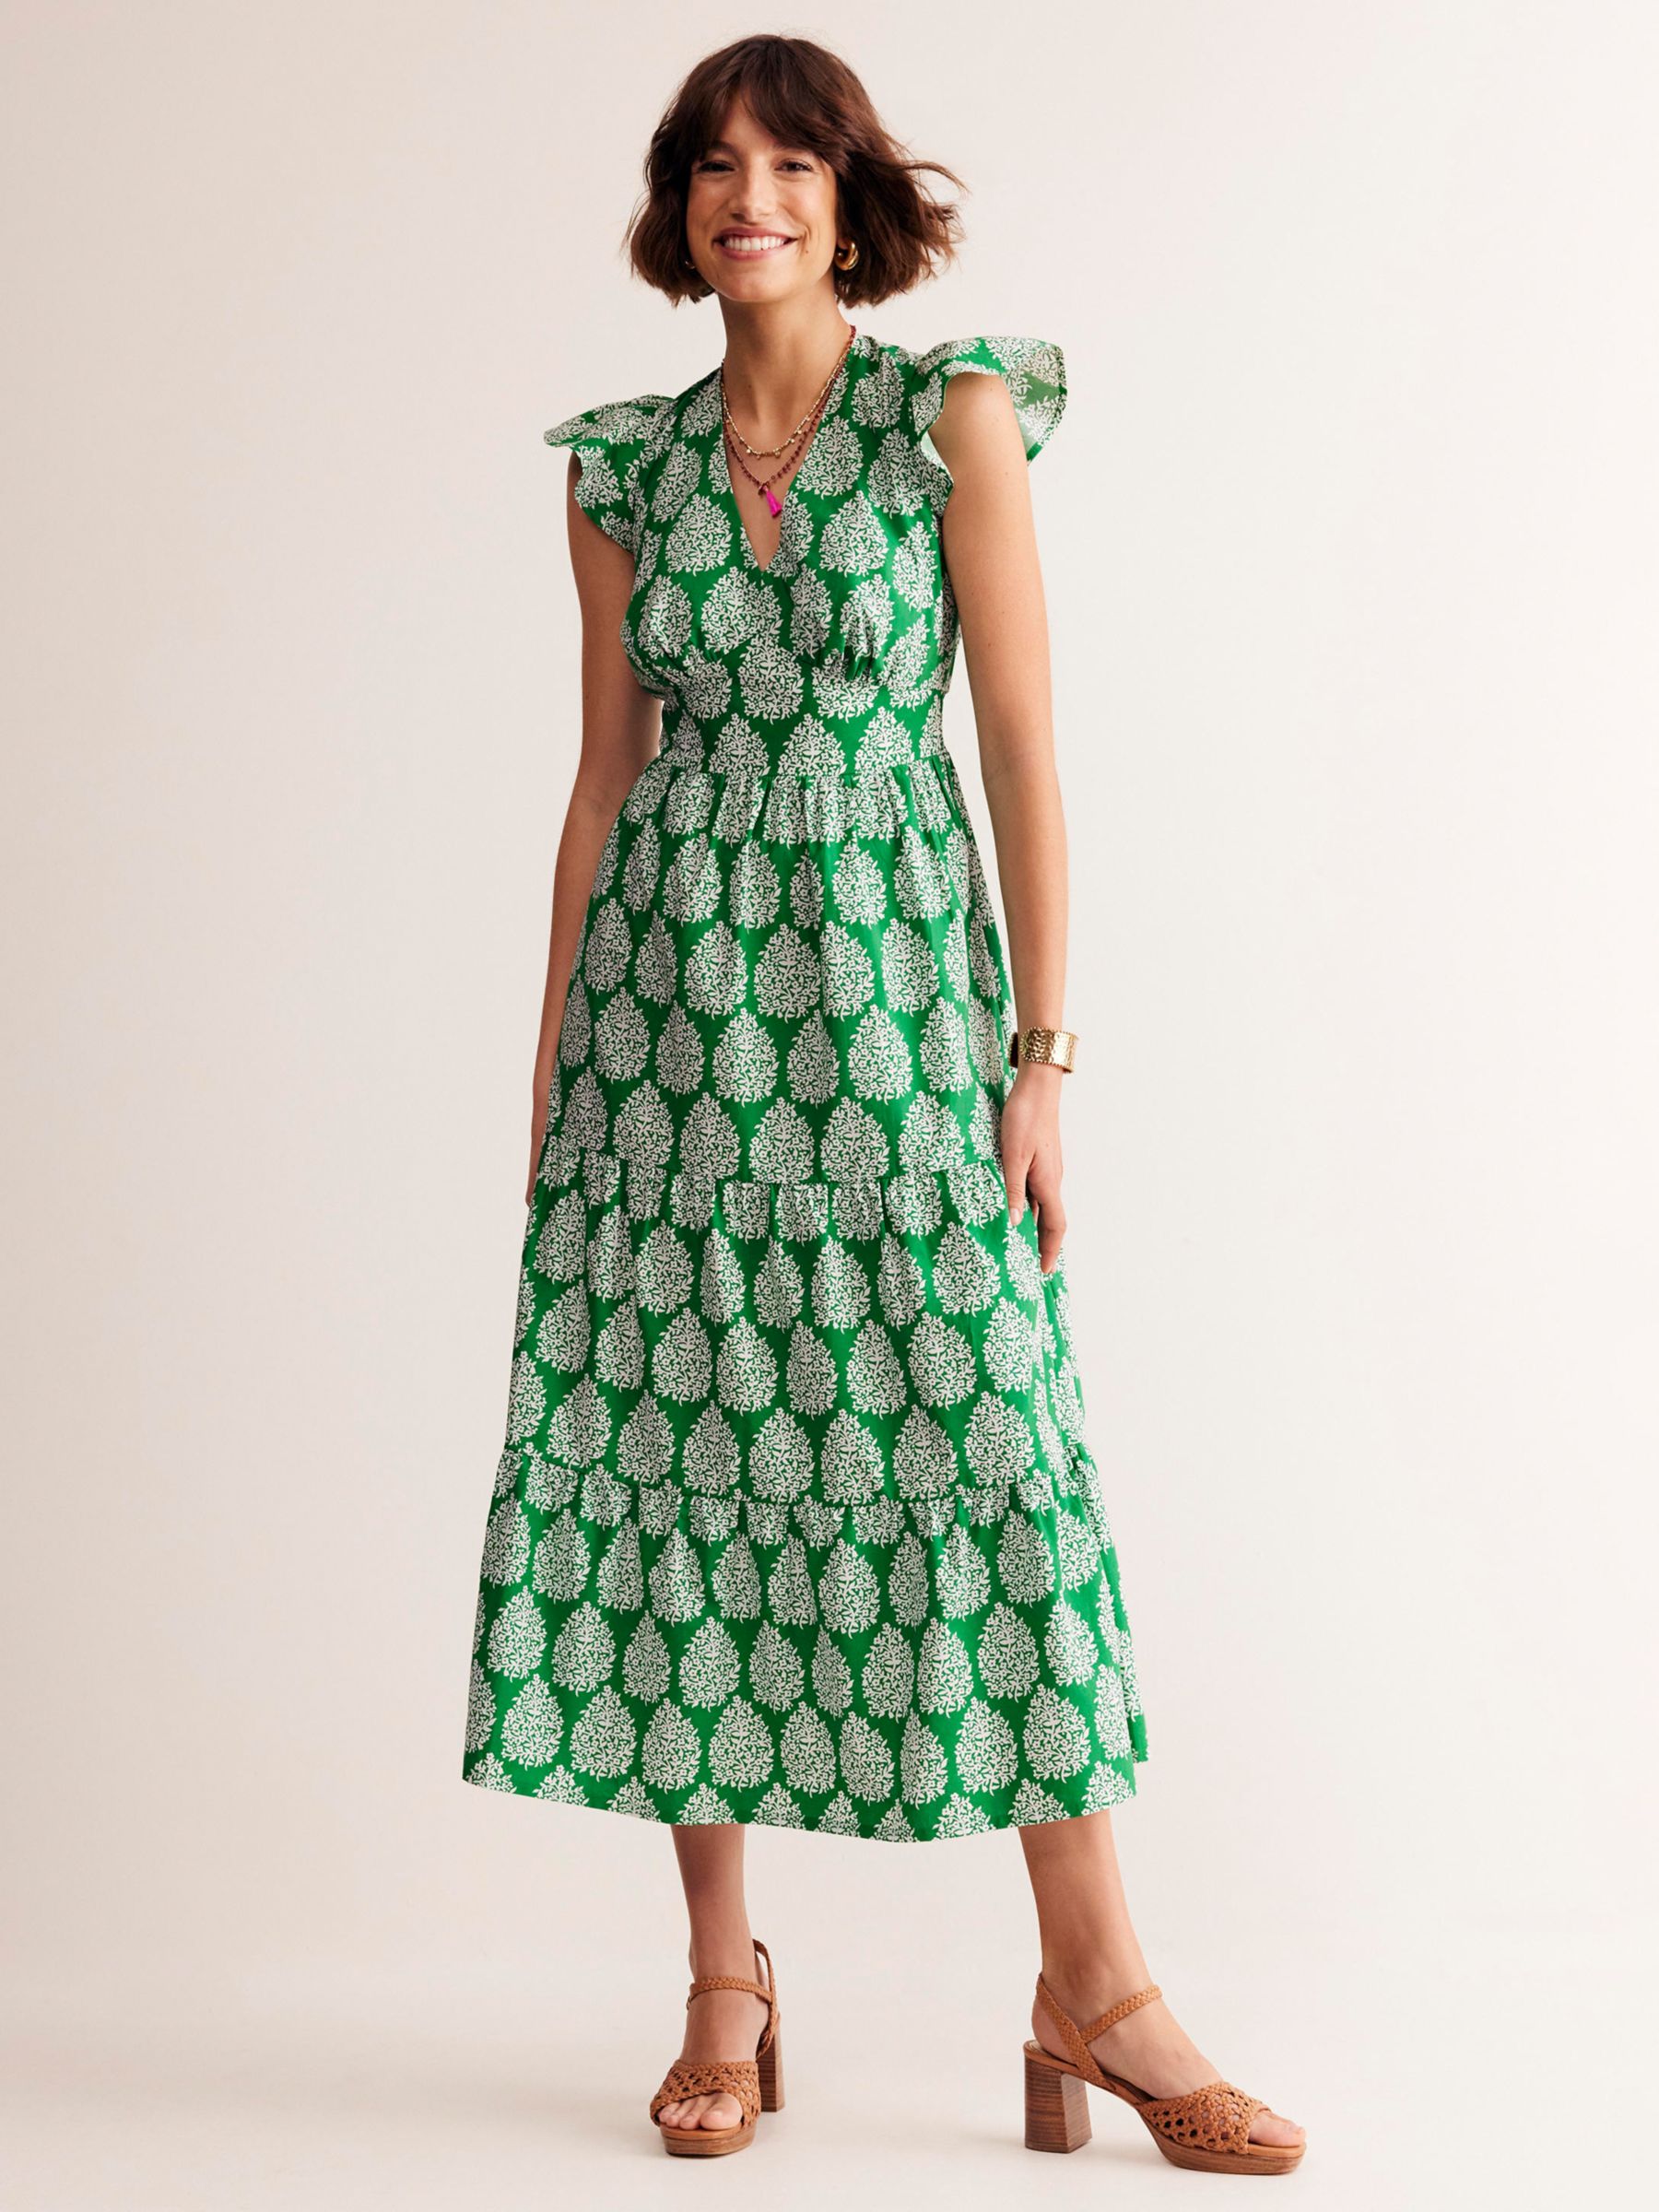 Boden May Floret Print Tiered Cotton Midi Dress, Green/White, 8